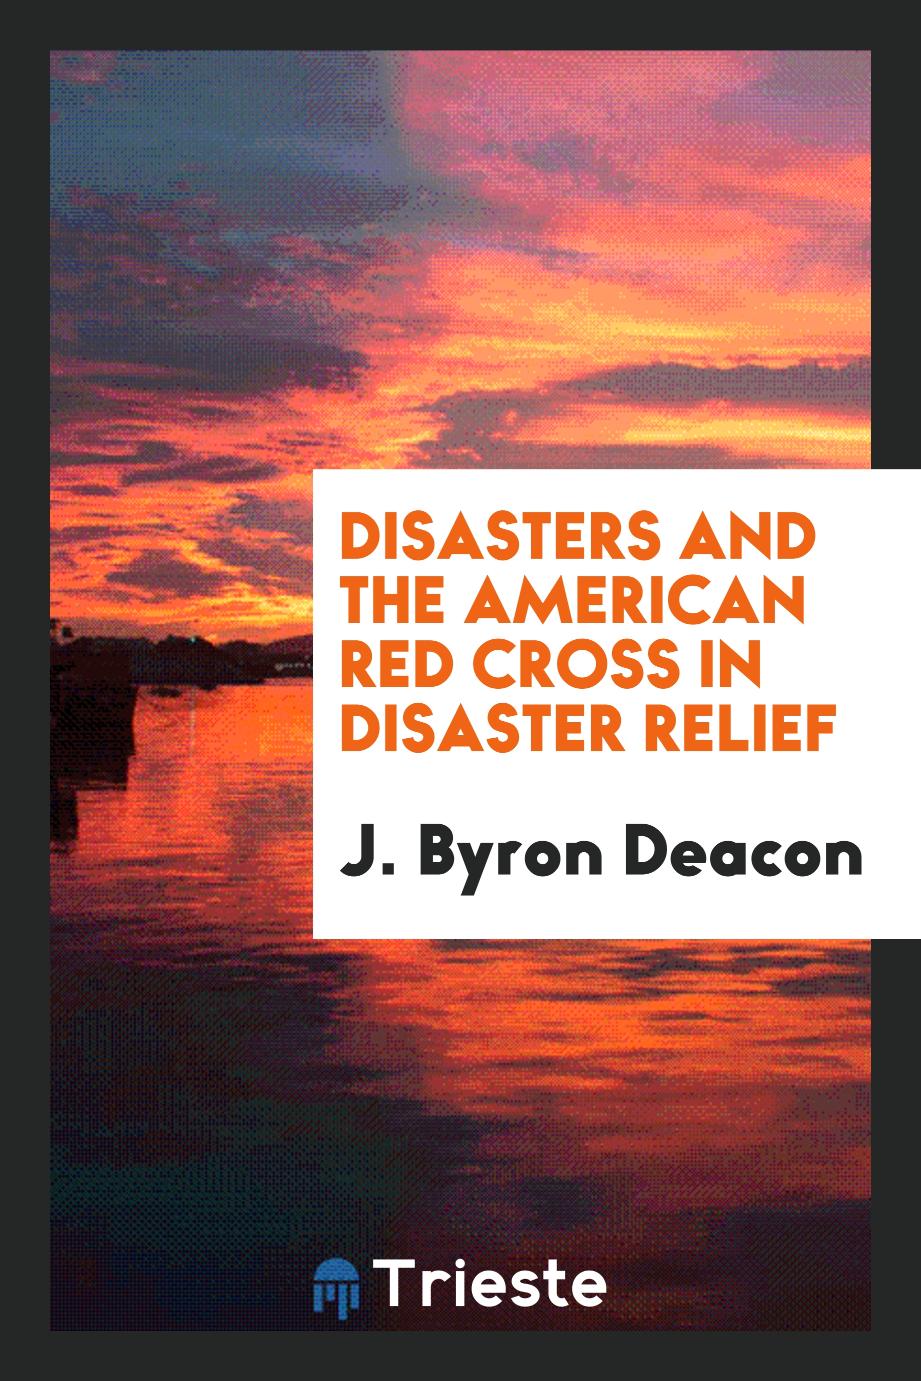 Disasters and the American Red Cross in disaster relief